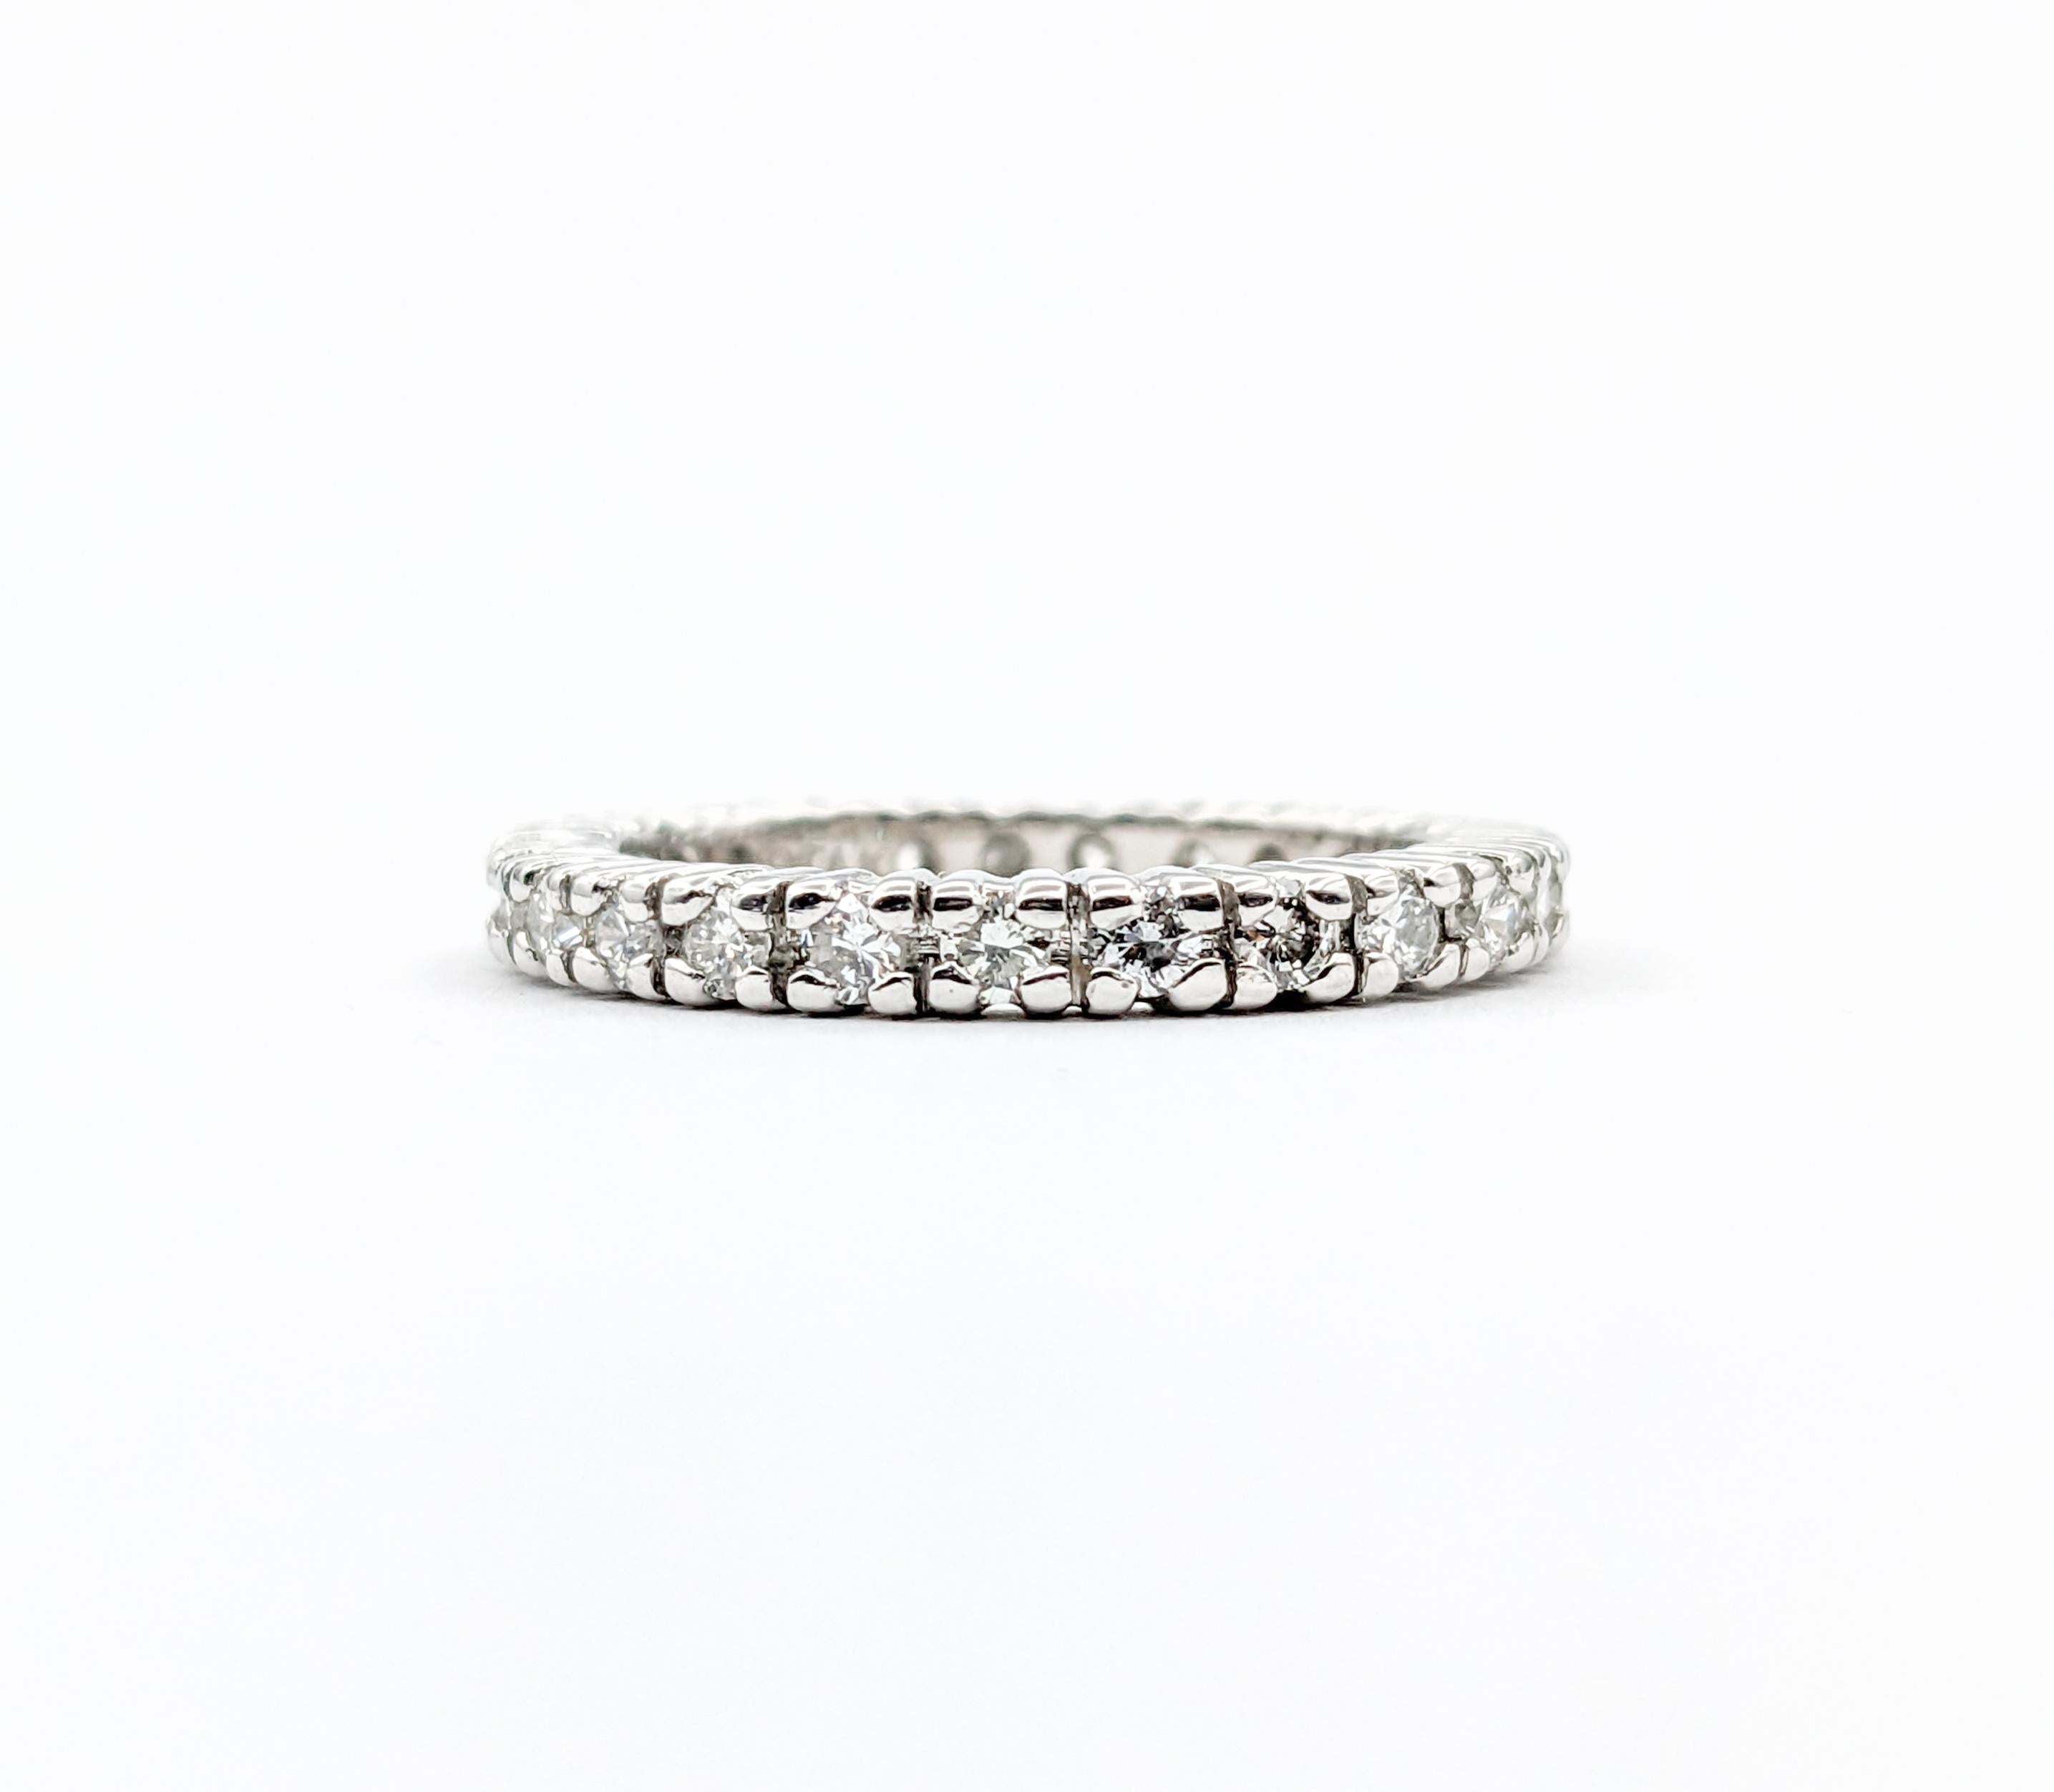 .75ctw Eternity Diamond Ring In Platinum

Presenting a truly stunning Ring, exquisitely fashioned from the finest Platinum. This elegant piece is adorned with .75 carats of round diamonds, each selected for their SI clarity and near colorless white